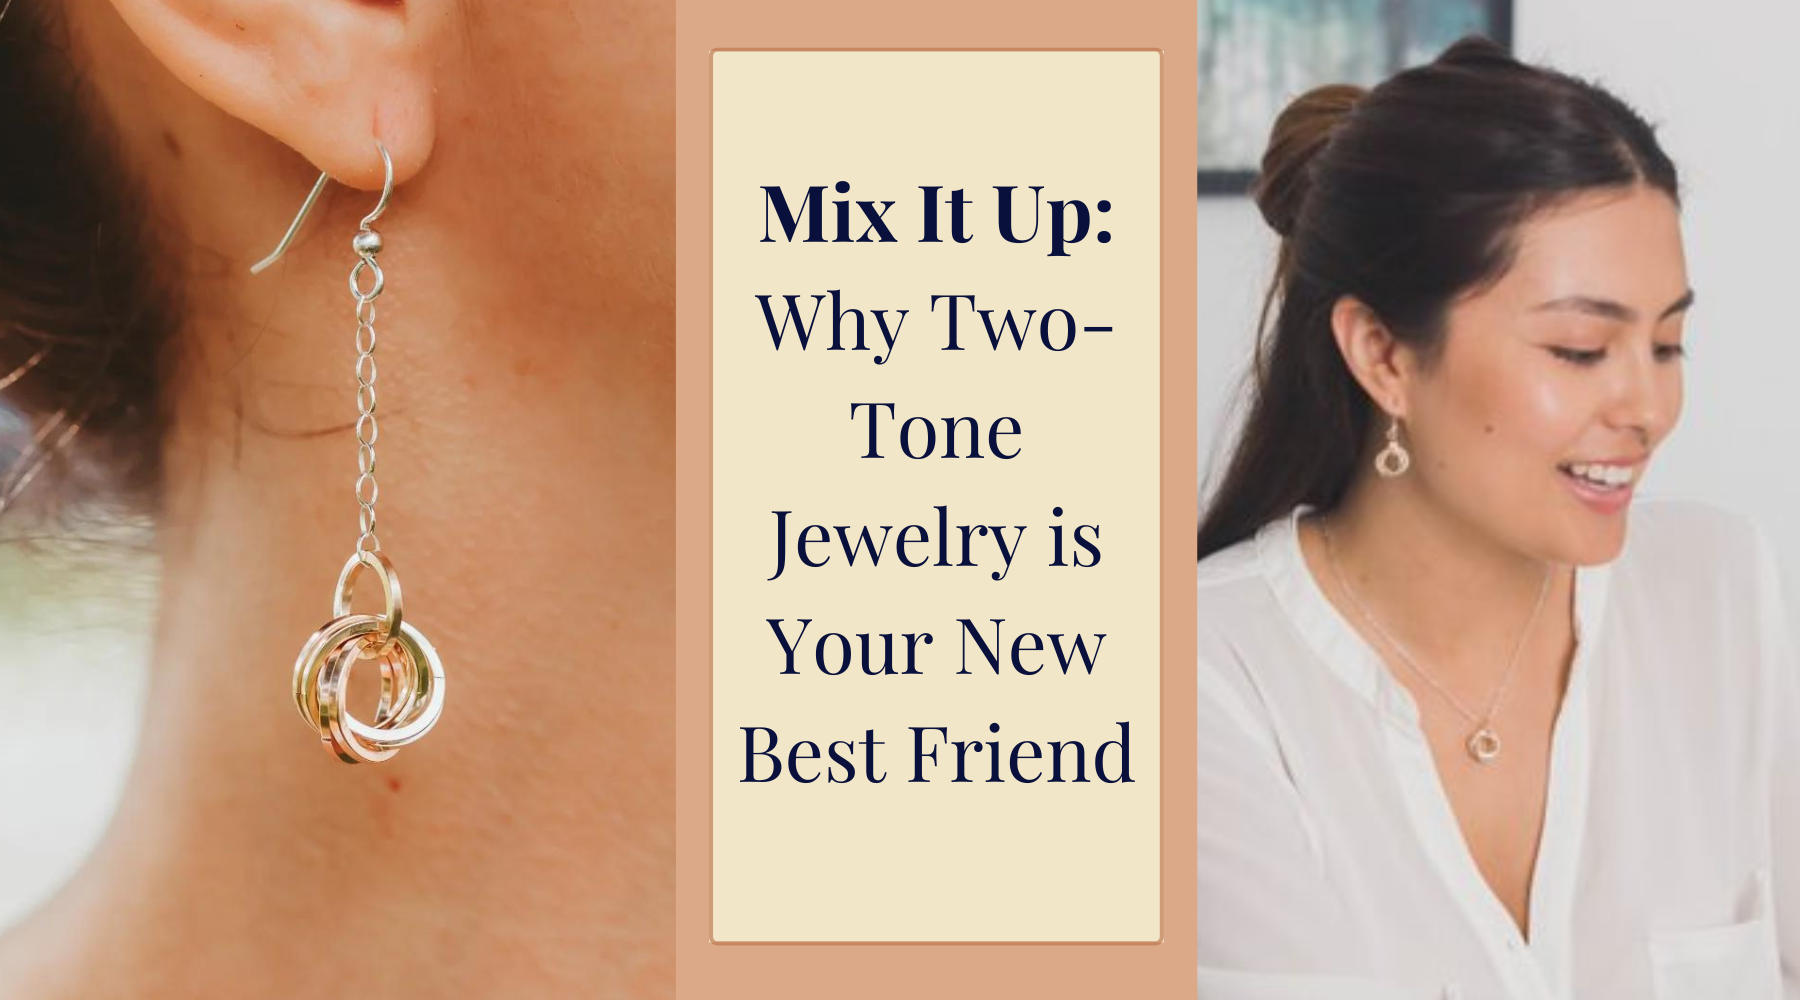 Mix It Up: Why Two-Tone Jewelry is Your New Best Friend